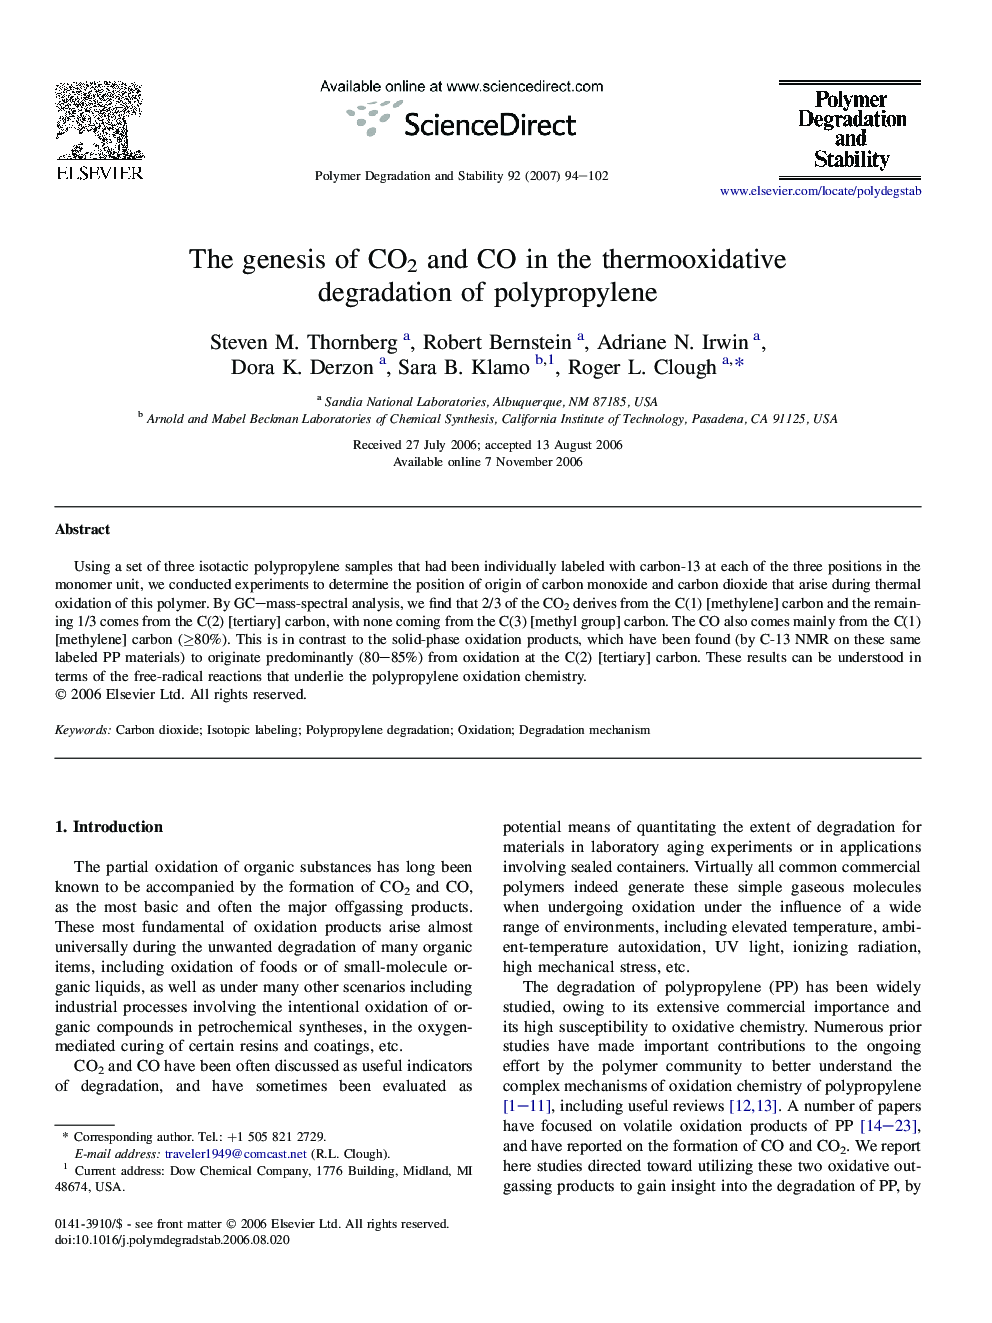 The genesis of CO2 and CO in the thermooxidative degradation of polypropylene